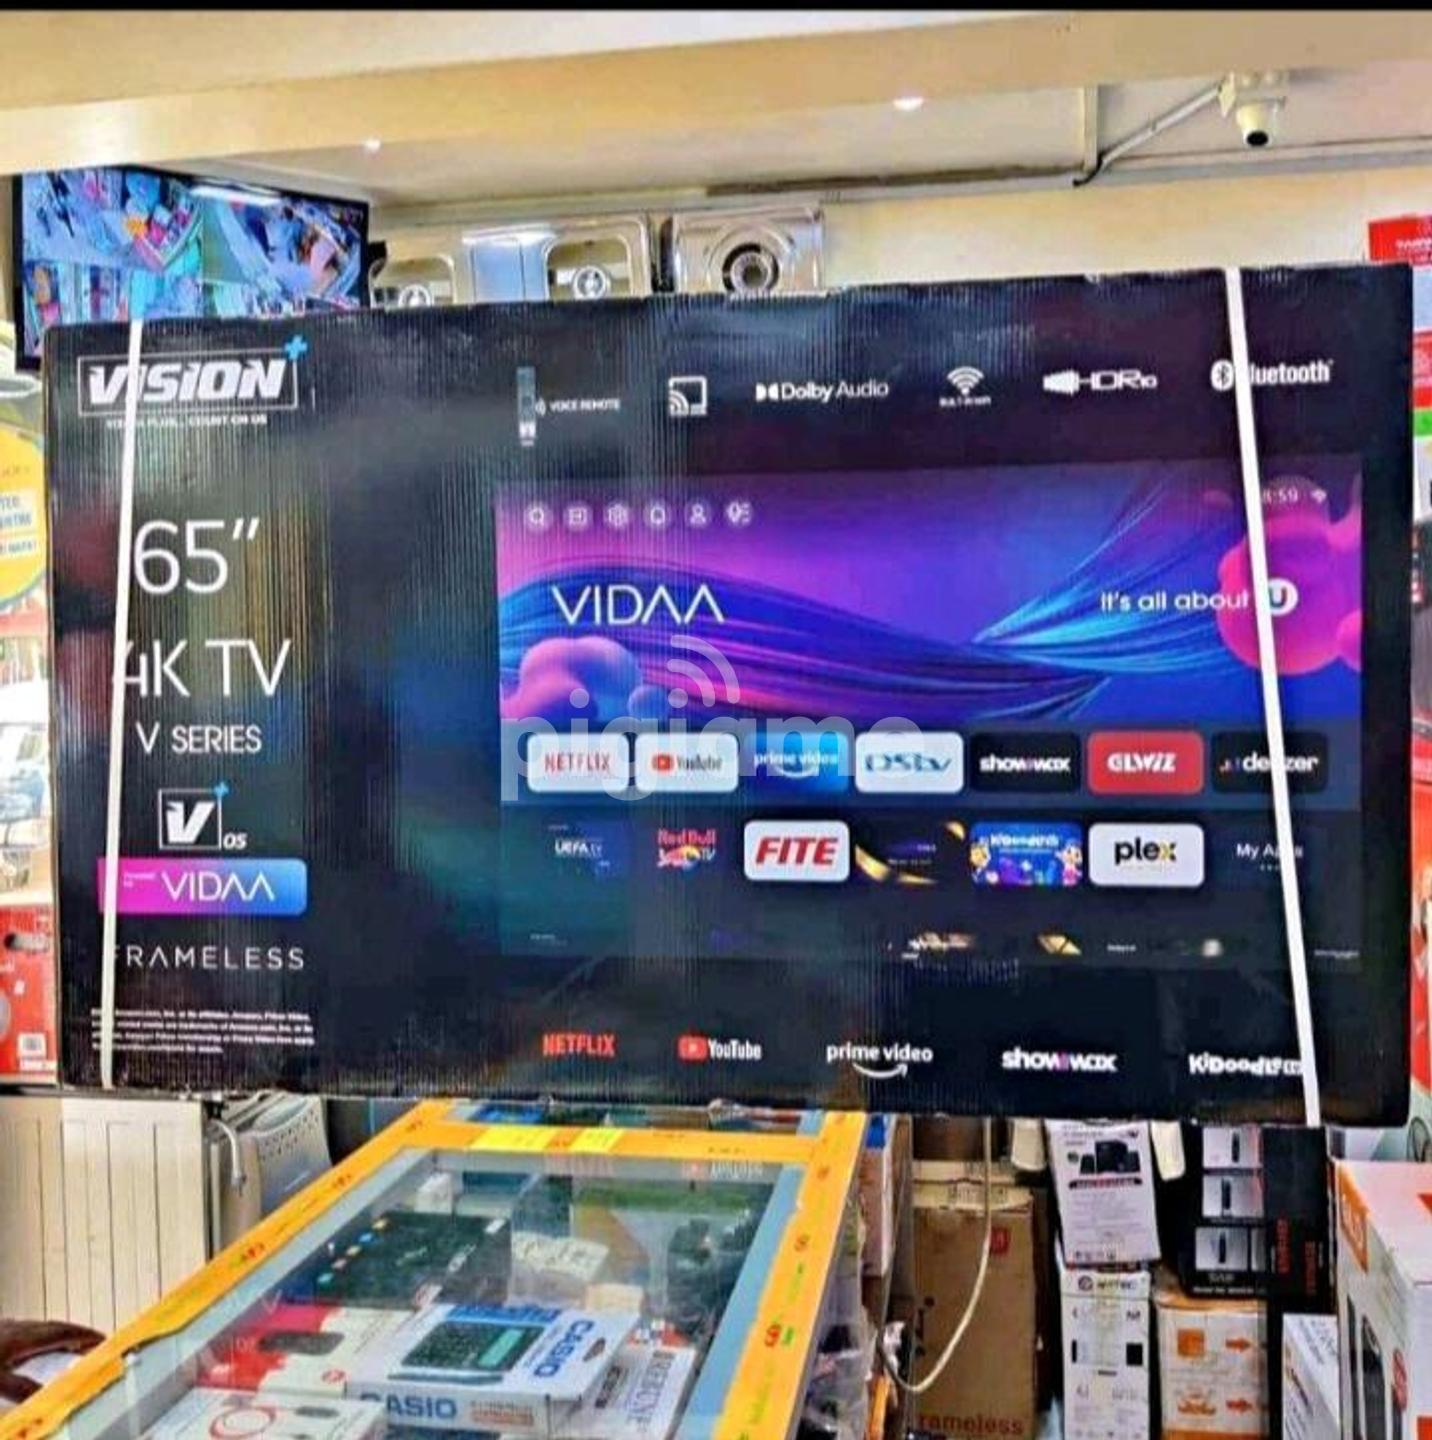 Tcl 32 Inch' S5400A Smart Android Tv in Nairobi CBD, Accra Road